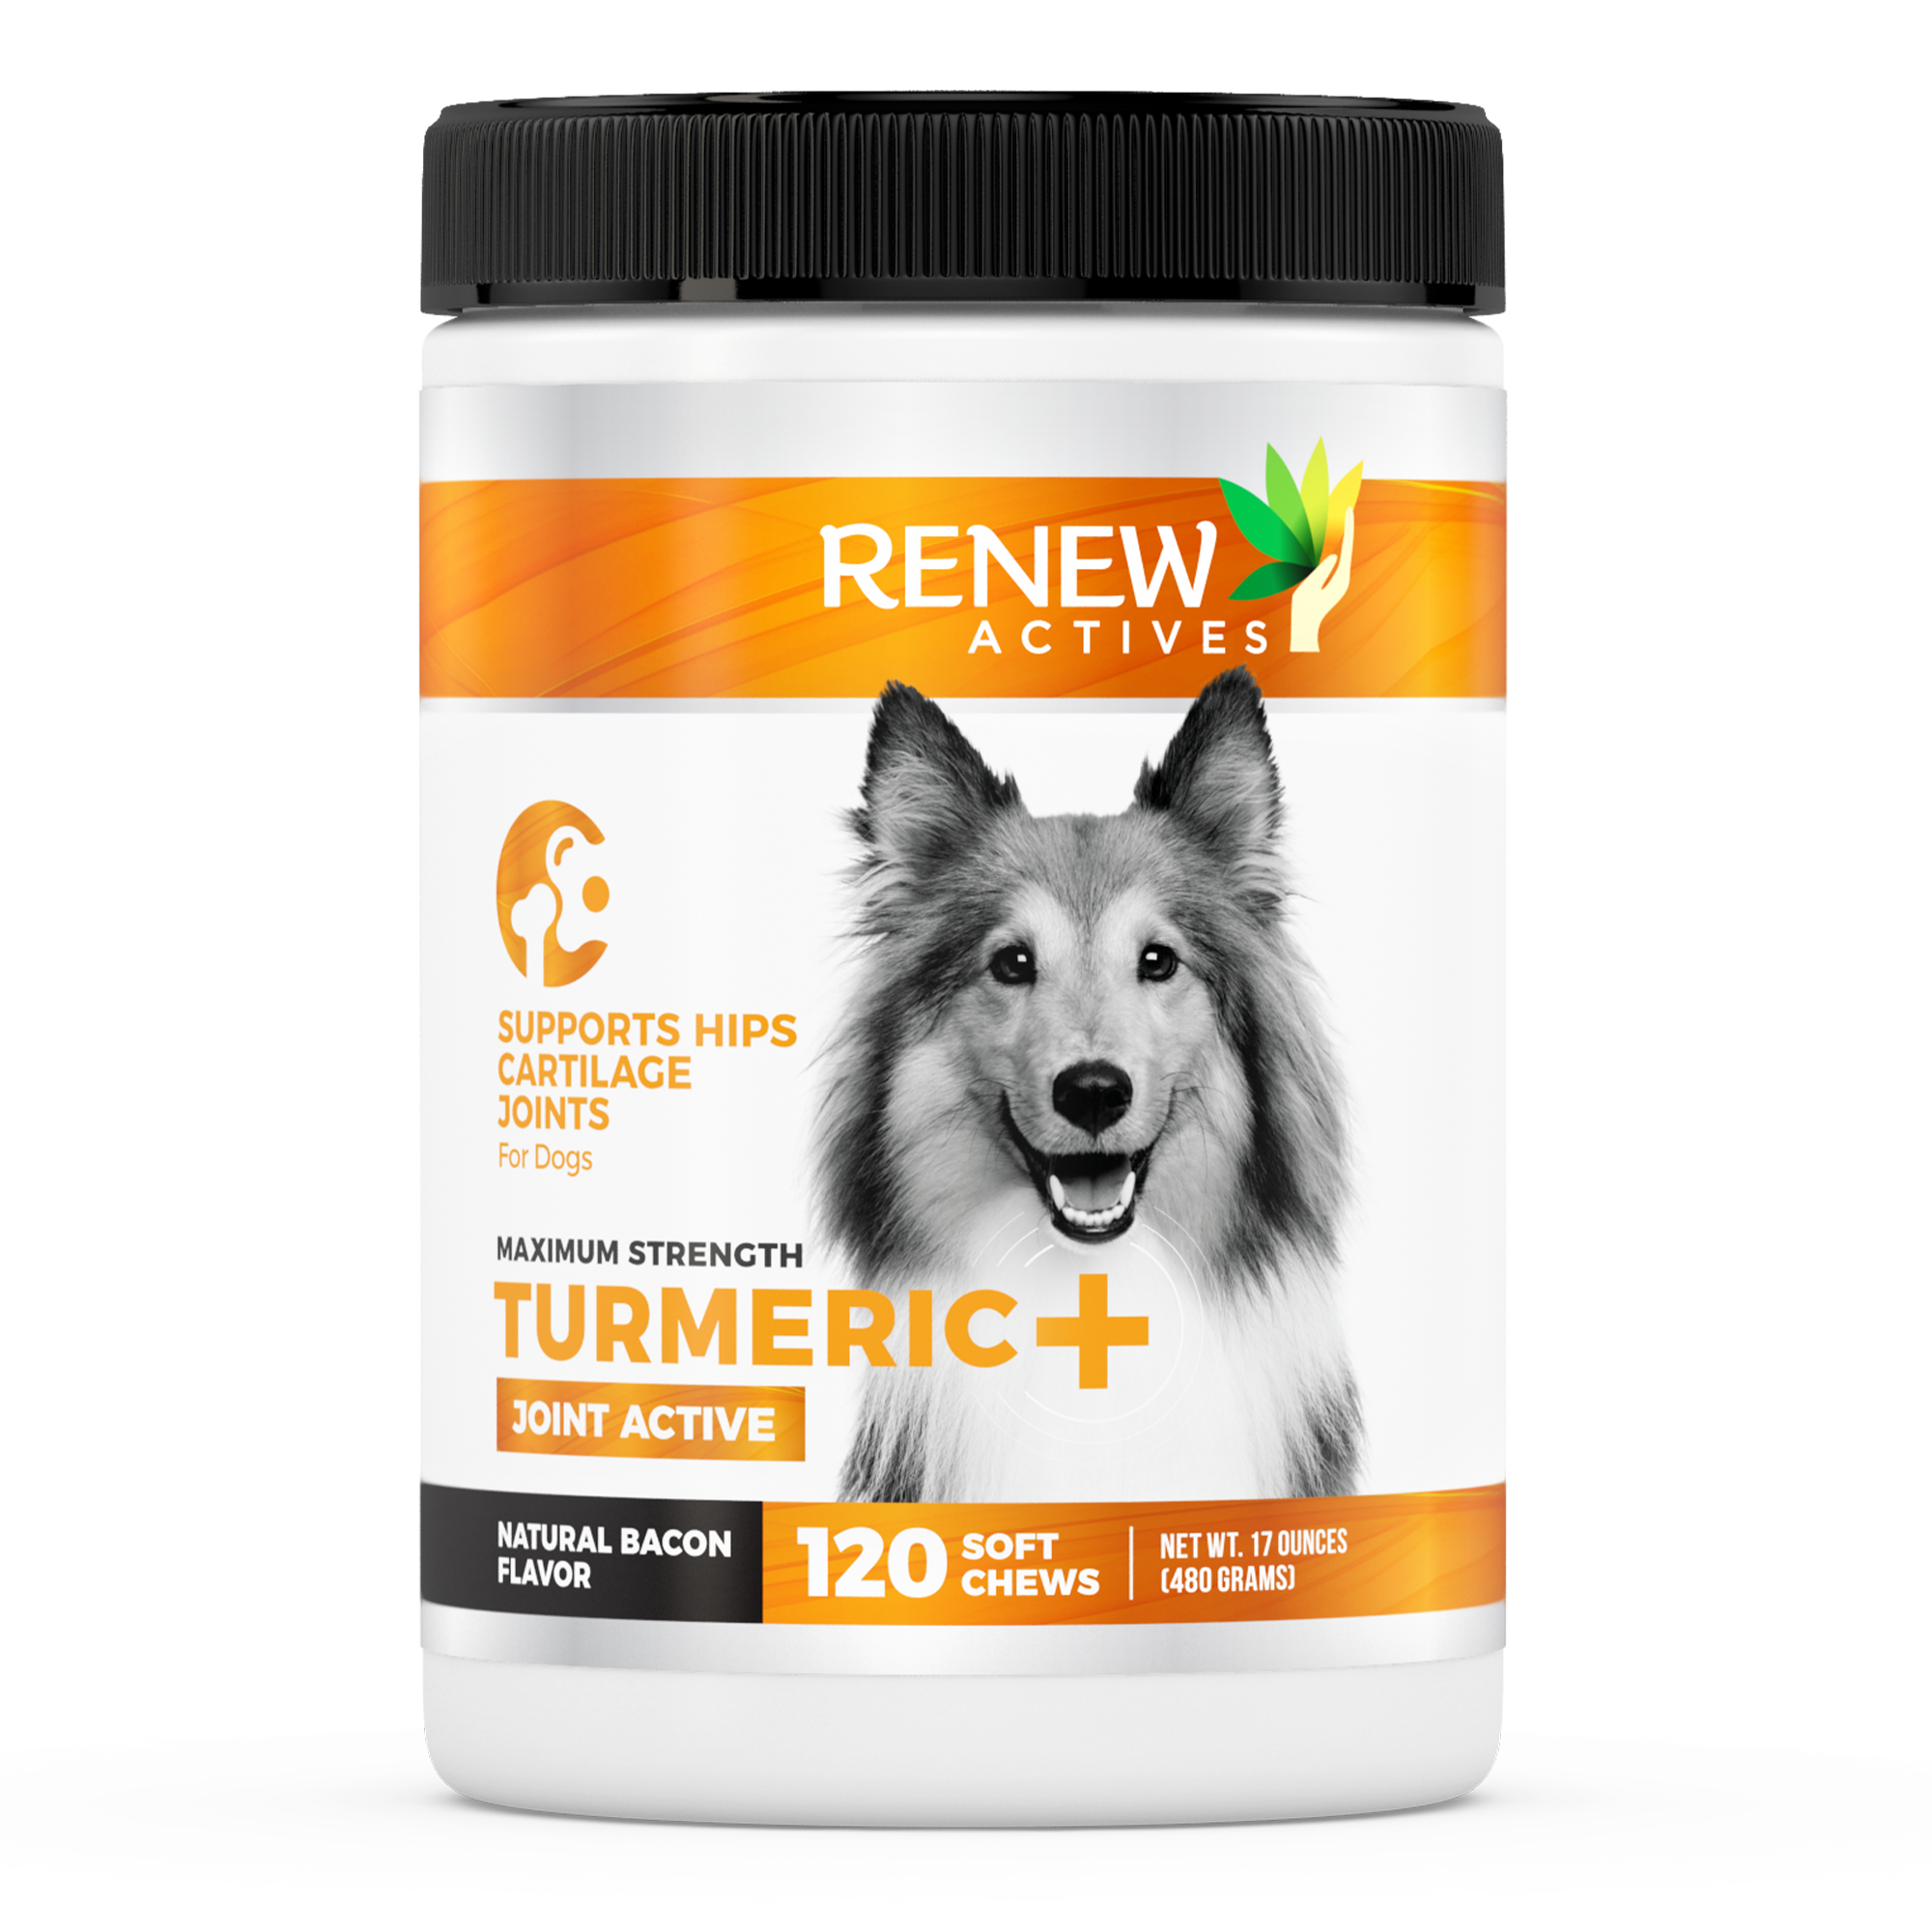 Organic Turmeric Joint Supplement for Dogs - 120 Soft Chews